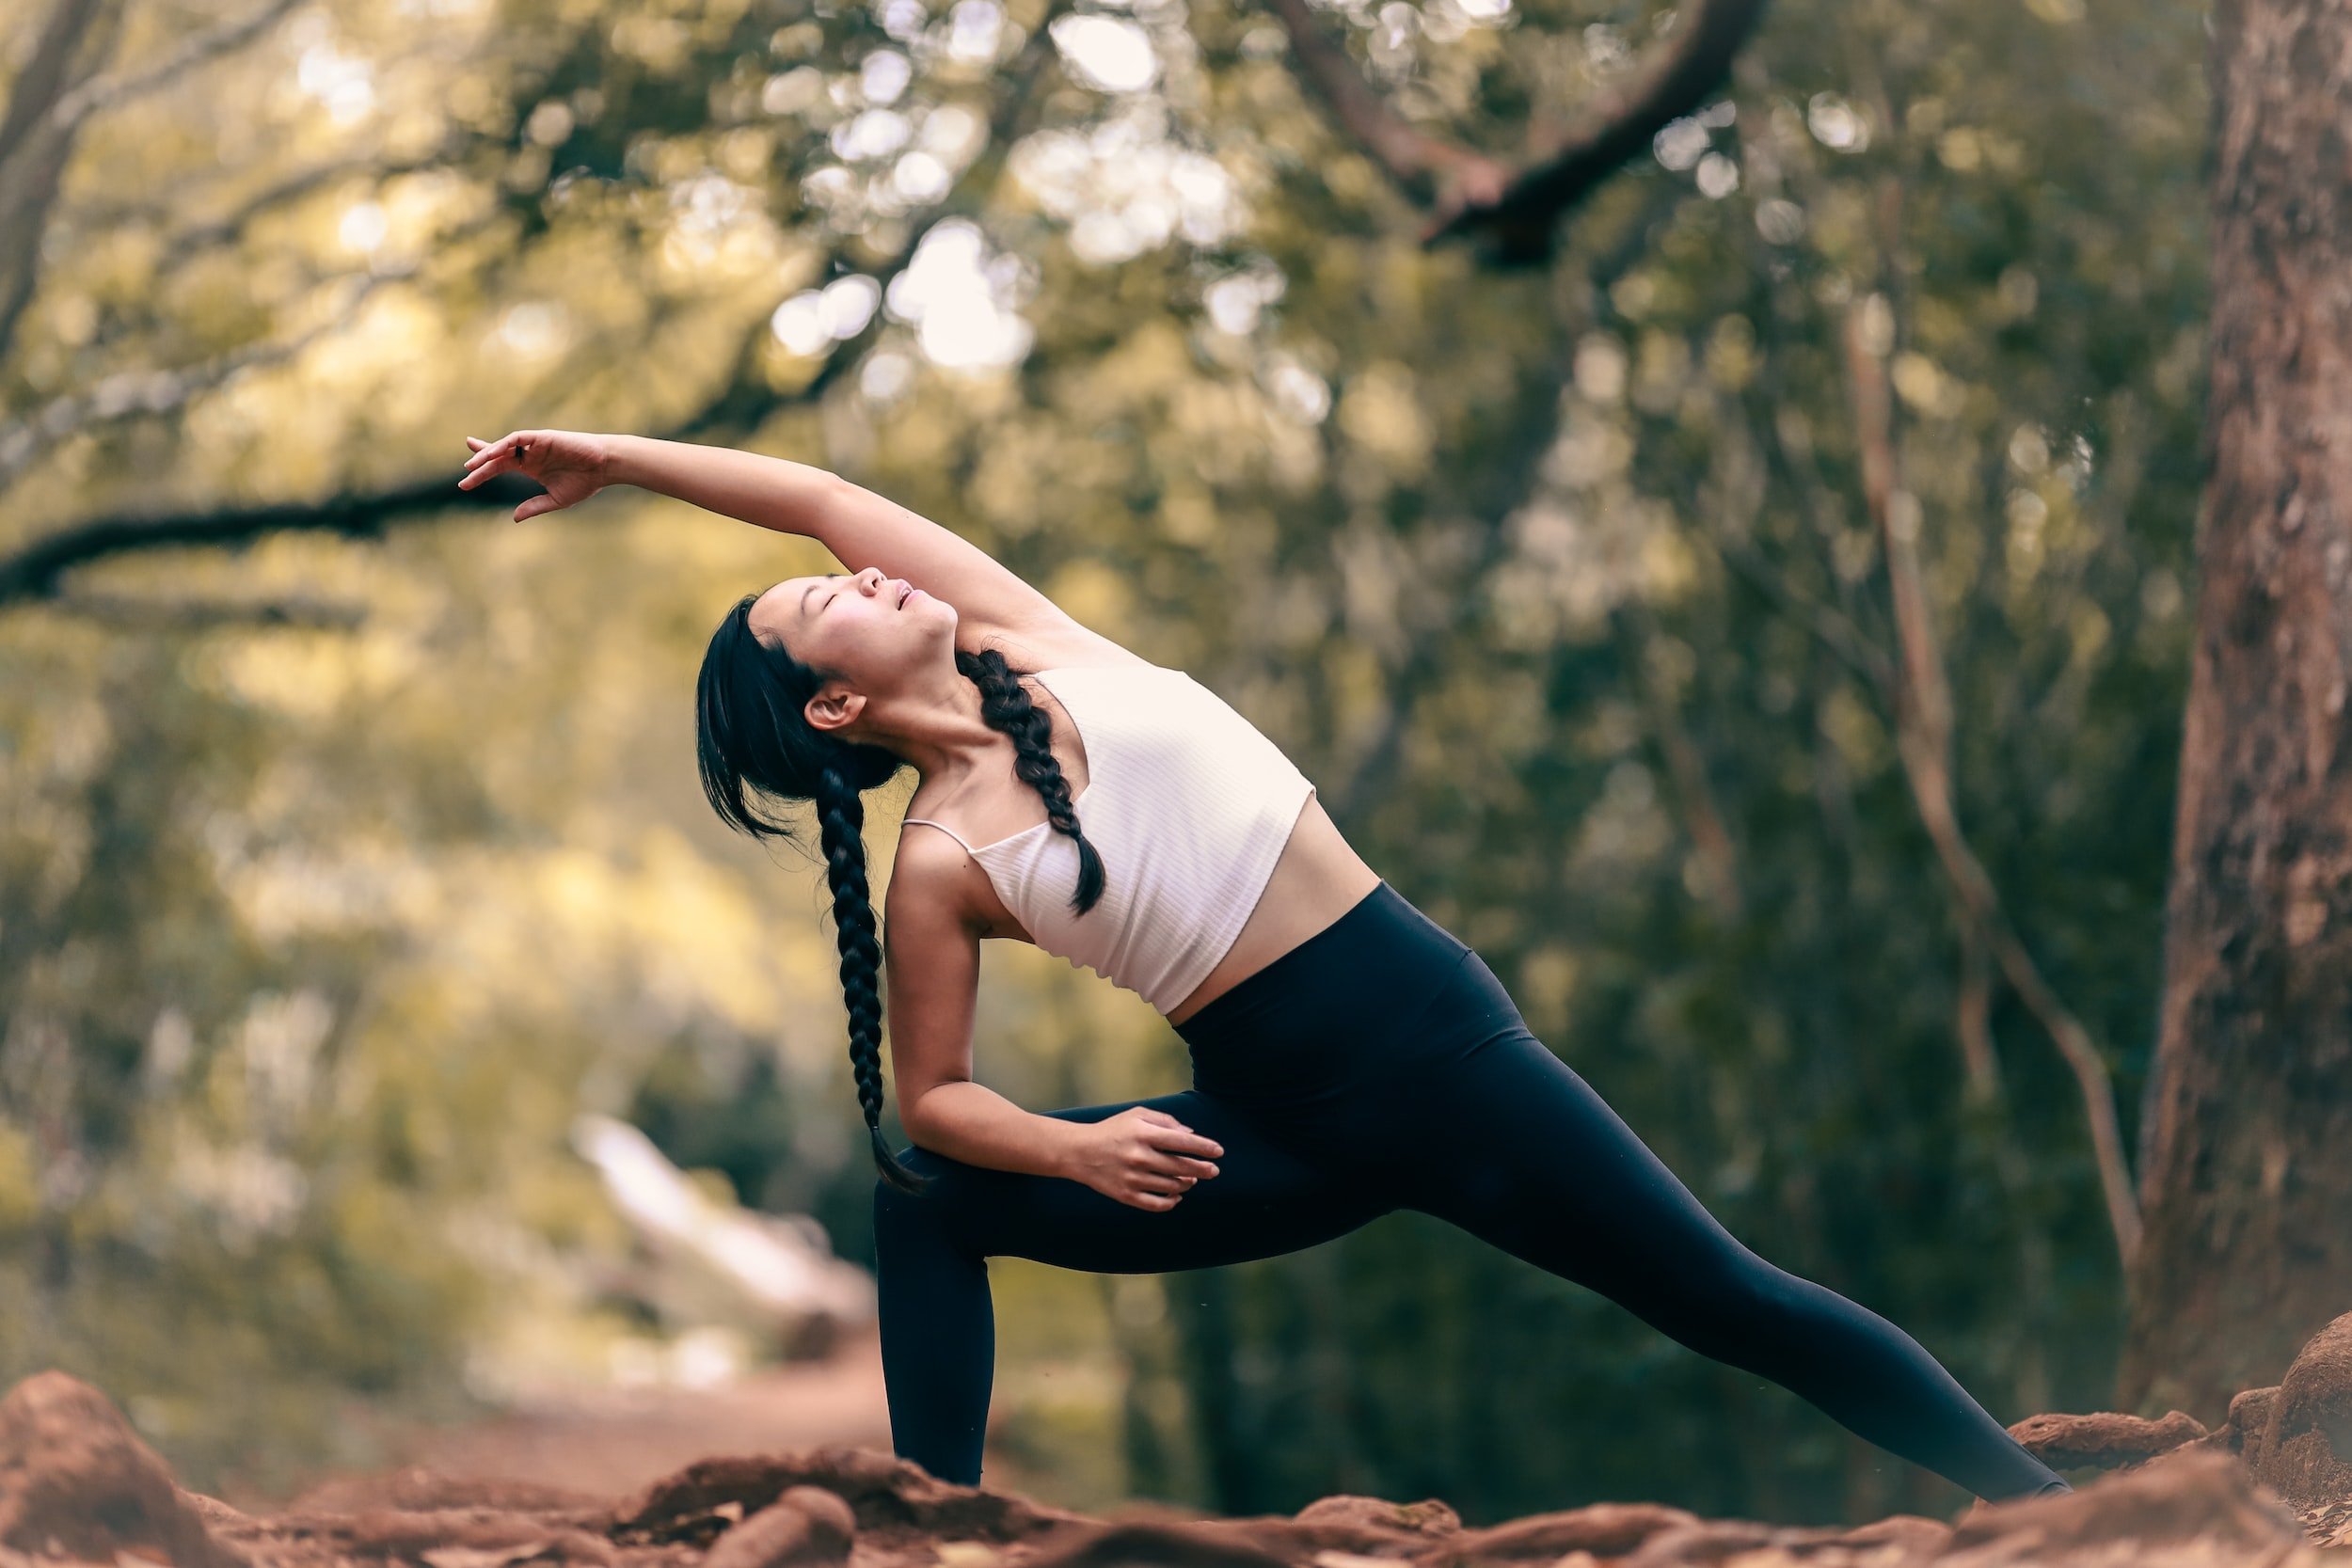 8 Practices You Can Do To Live A Healthy Yoga Lifestyle – Yoga Mandala